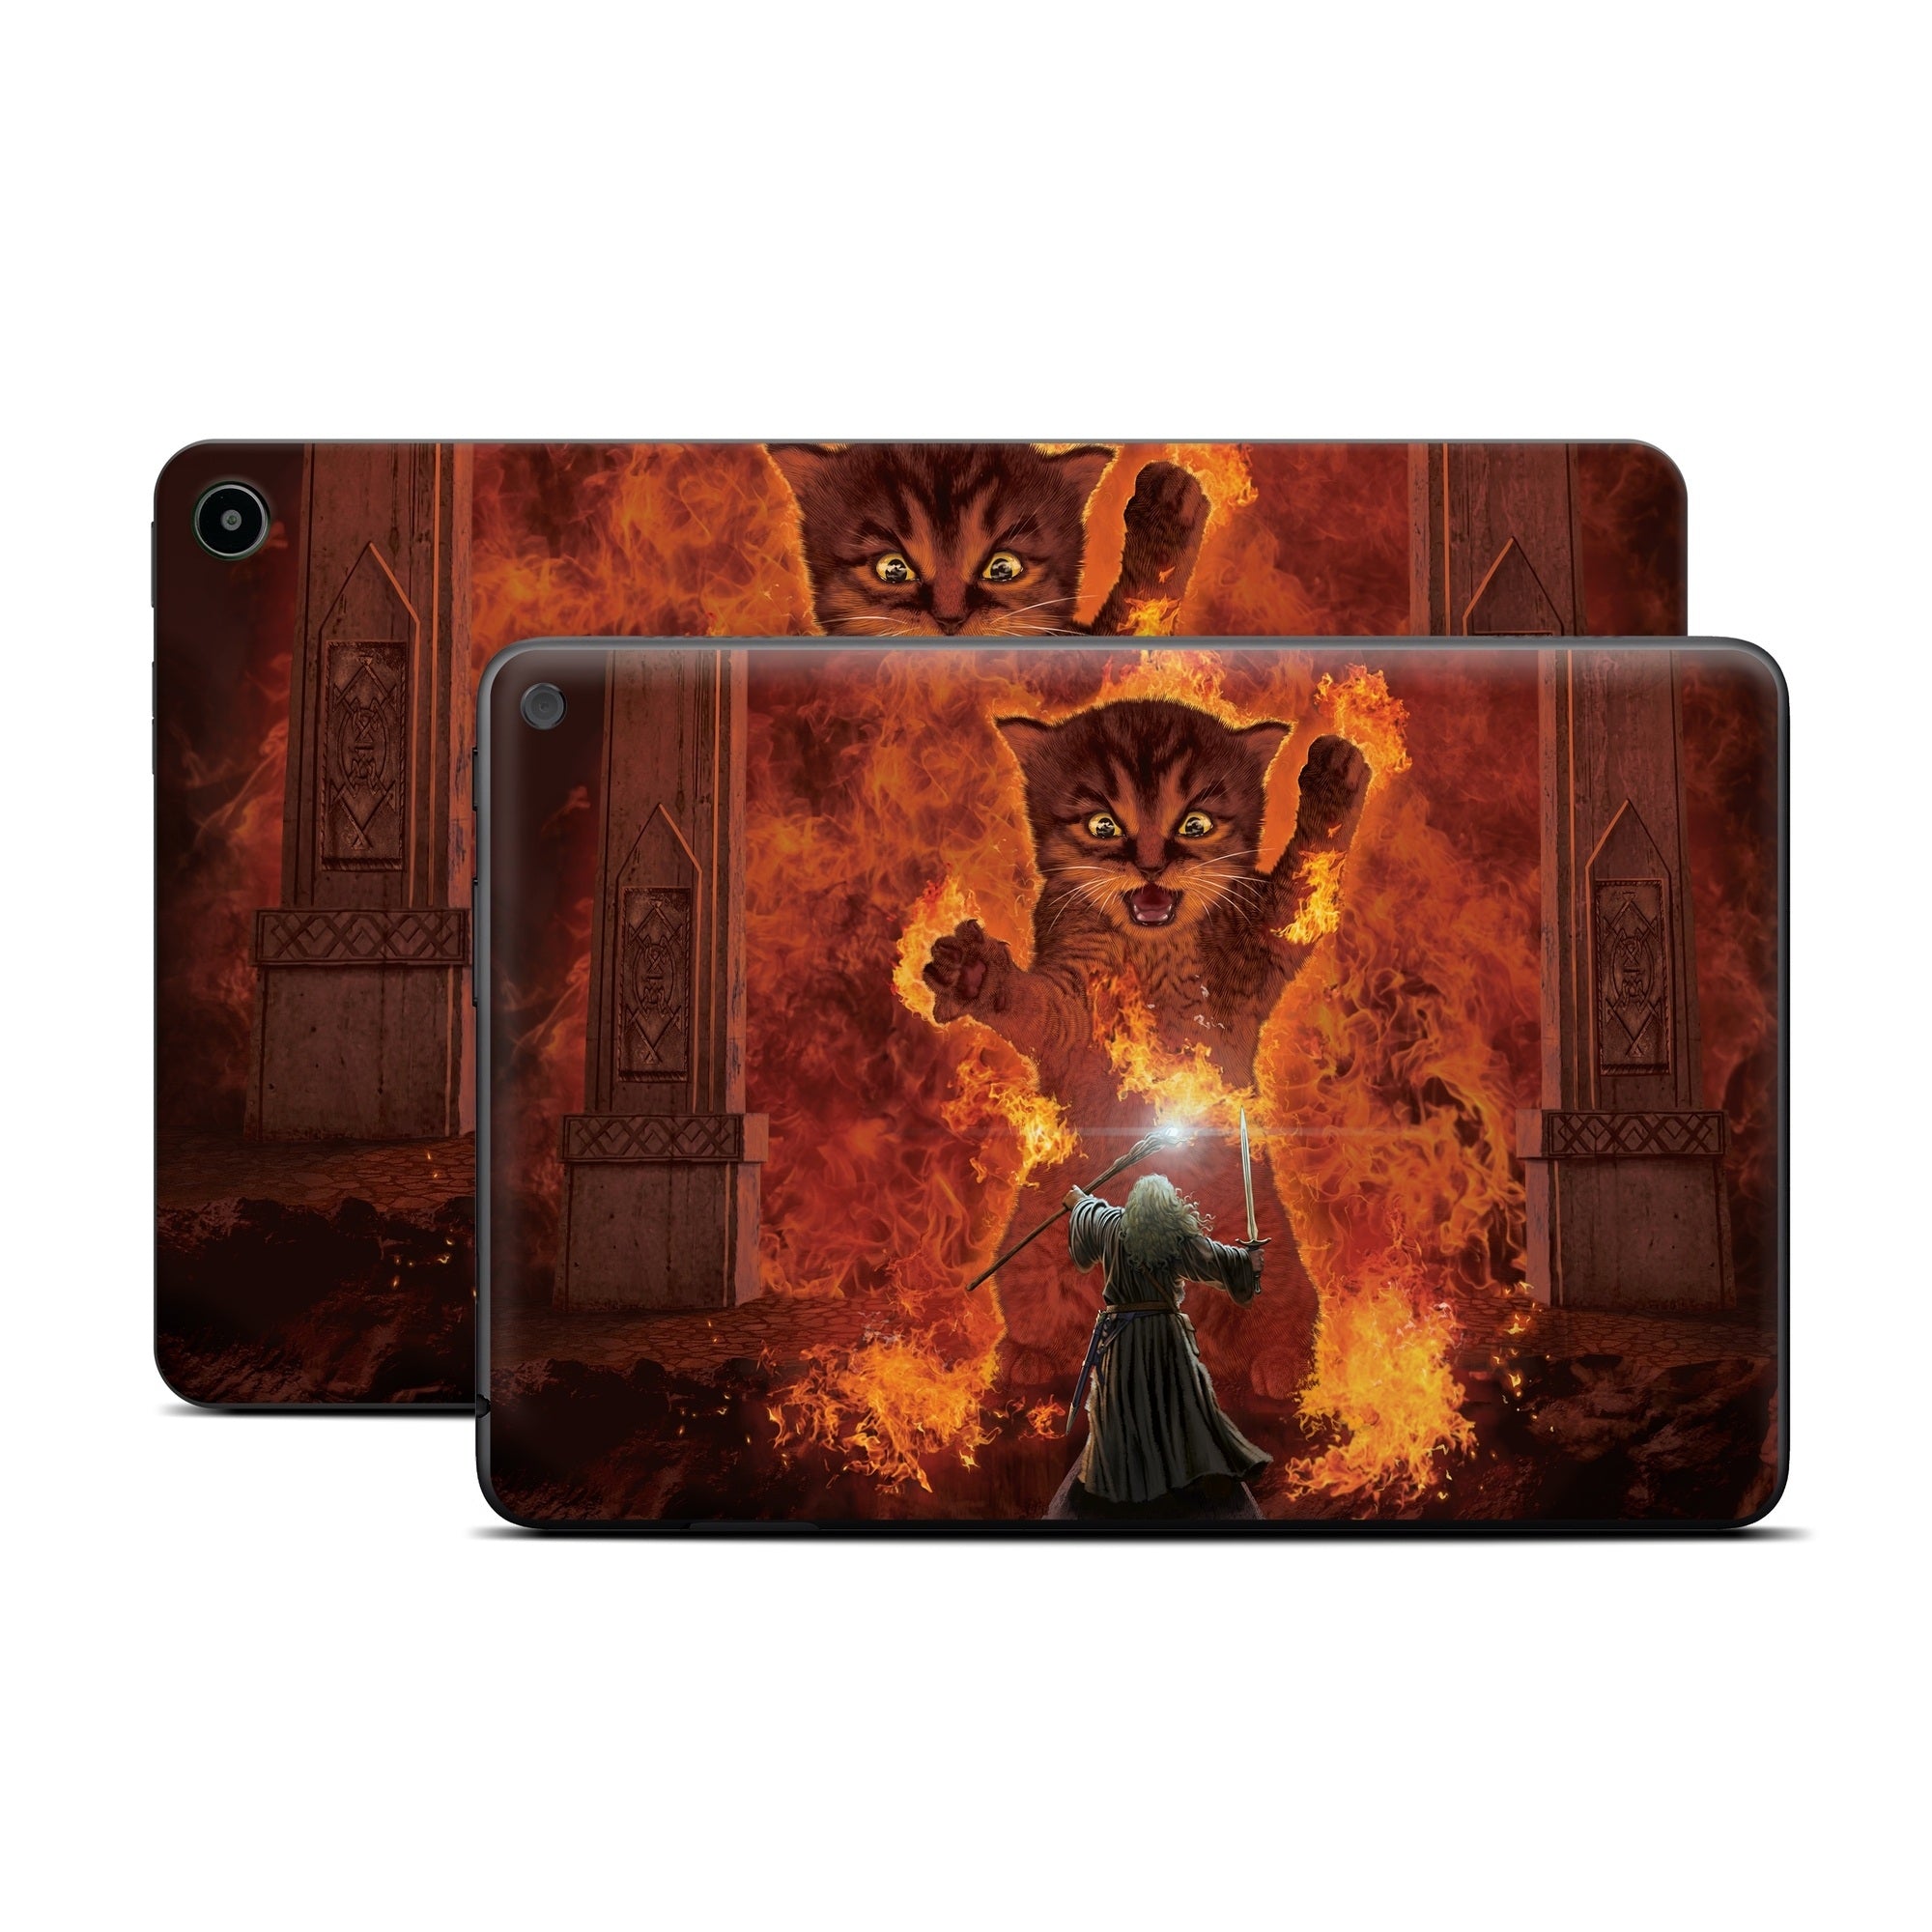 You Shall Not Pass - Amazon Fire Skin